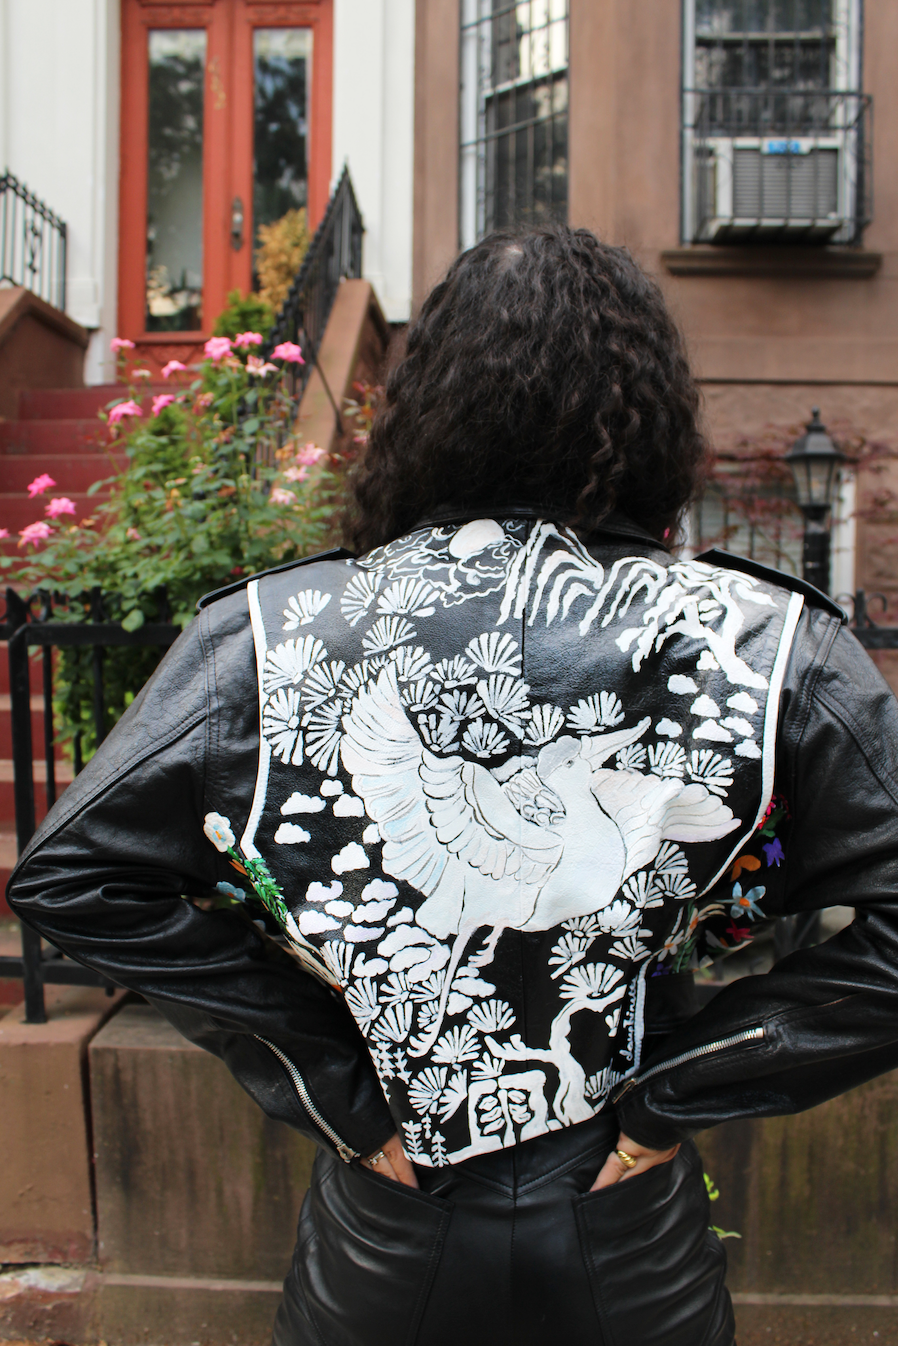 Fully hand-painted black motorcycle jacket dating from the 1980s. Floral scrapbook imagery to front, inspired by vintage pressed botanical prints. Pearl powder infused, crane-painted backside, modeled after antique mother-of-pearl inlaid cabinetry. Cropped style with silver hardware and adjustable belt